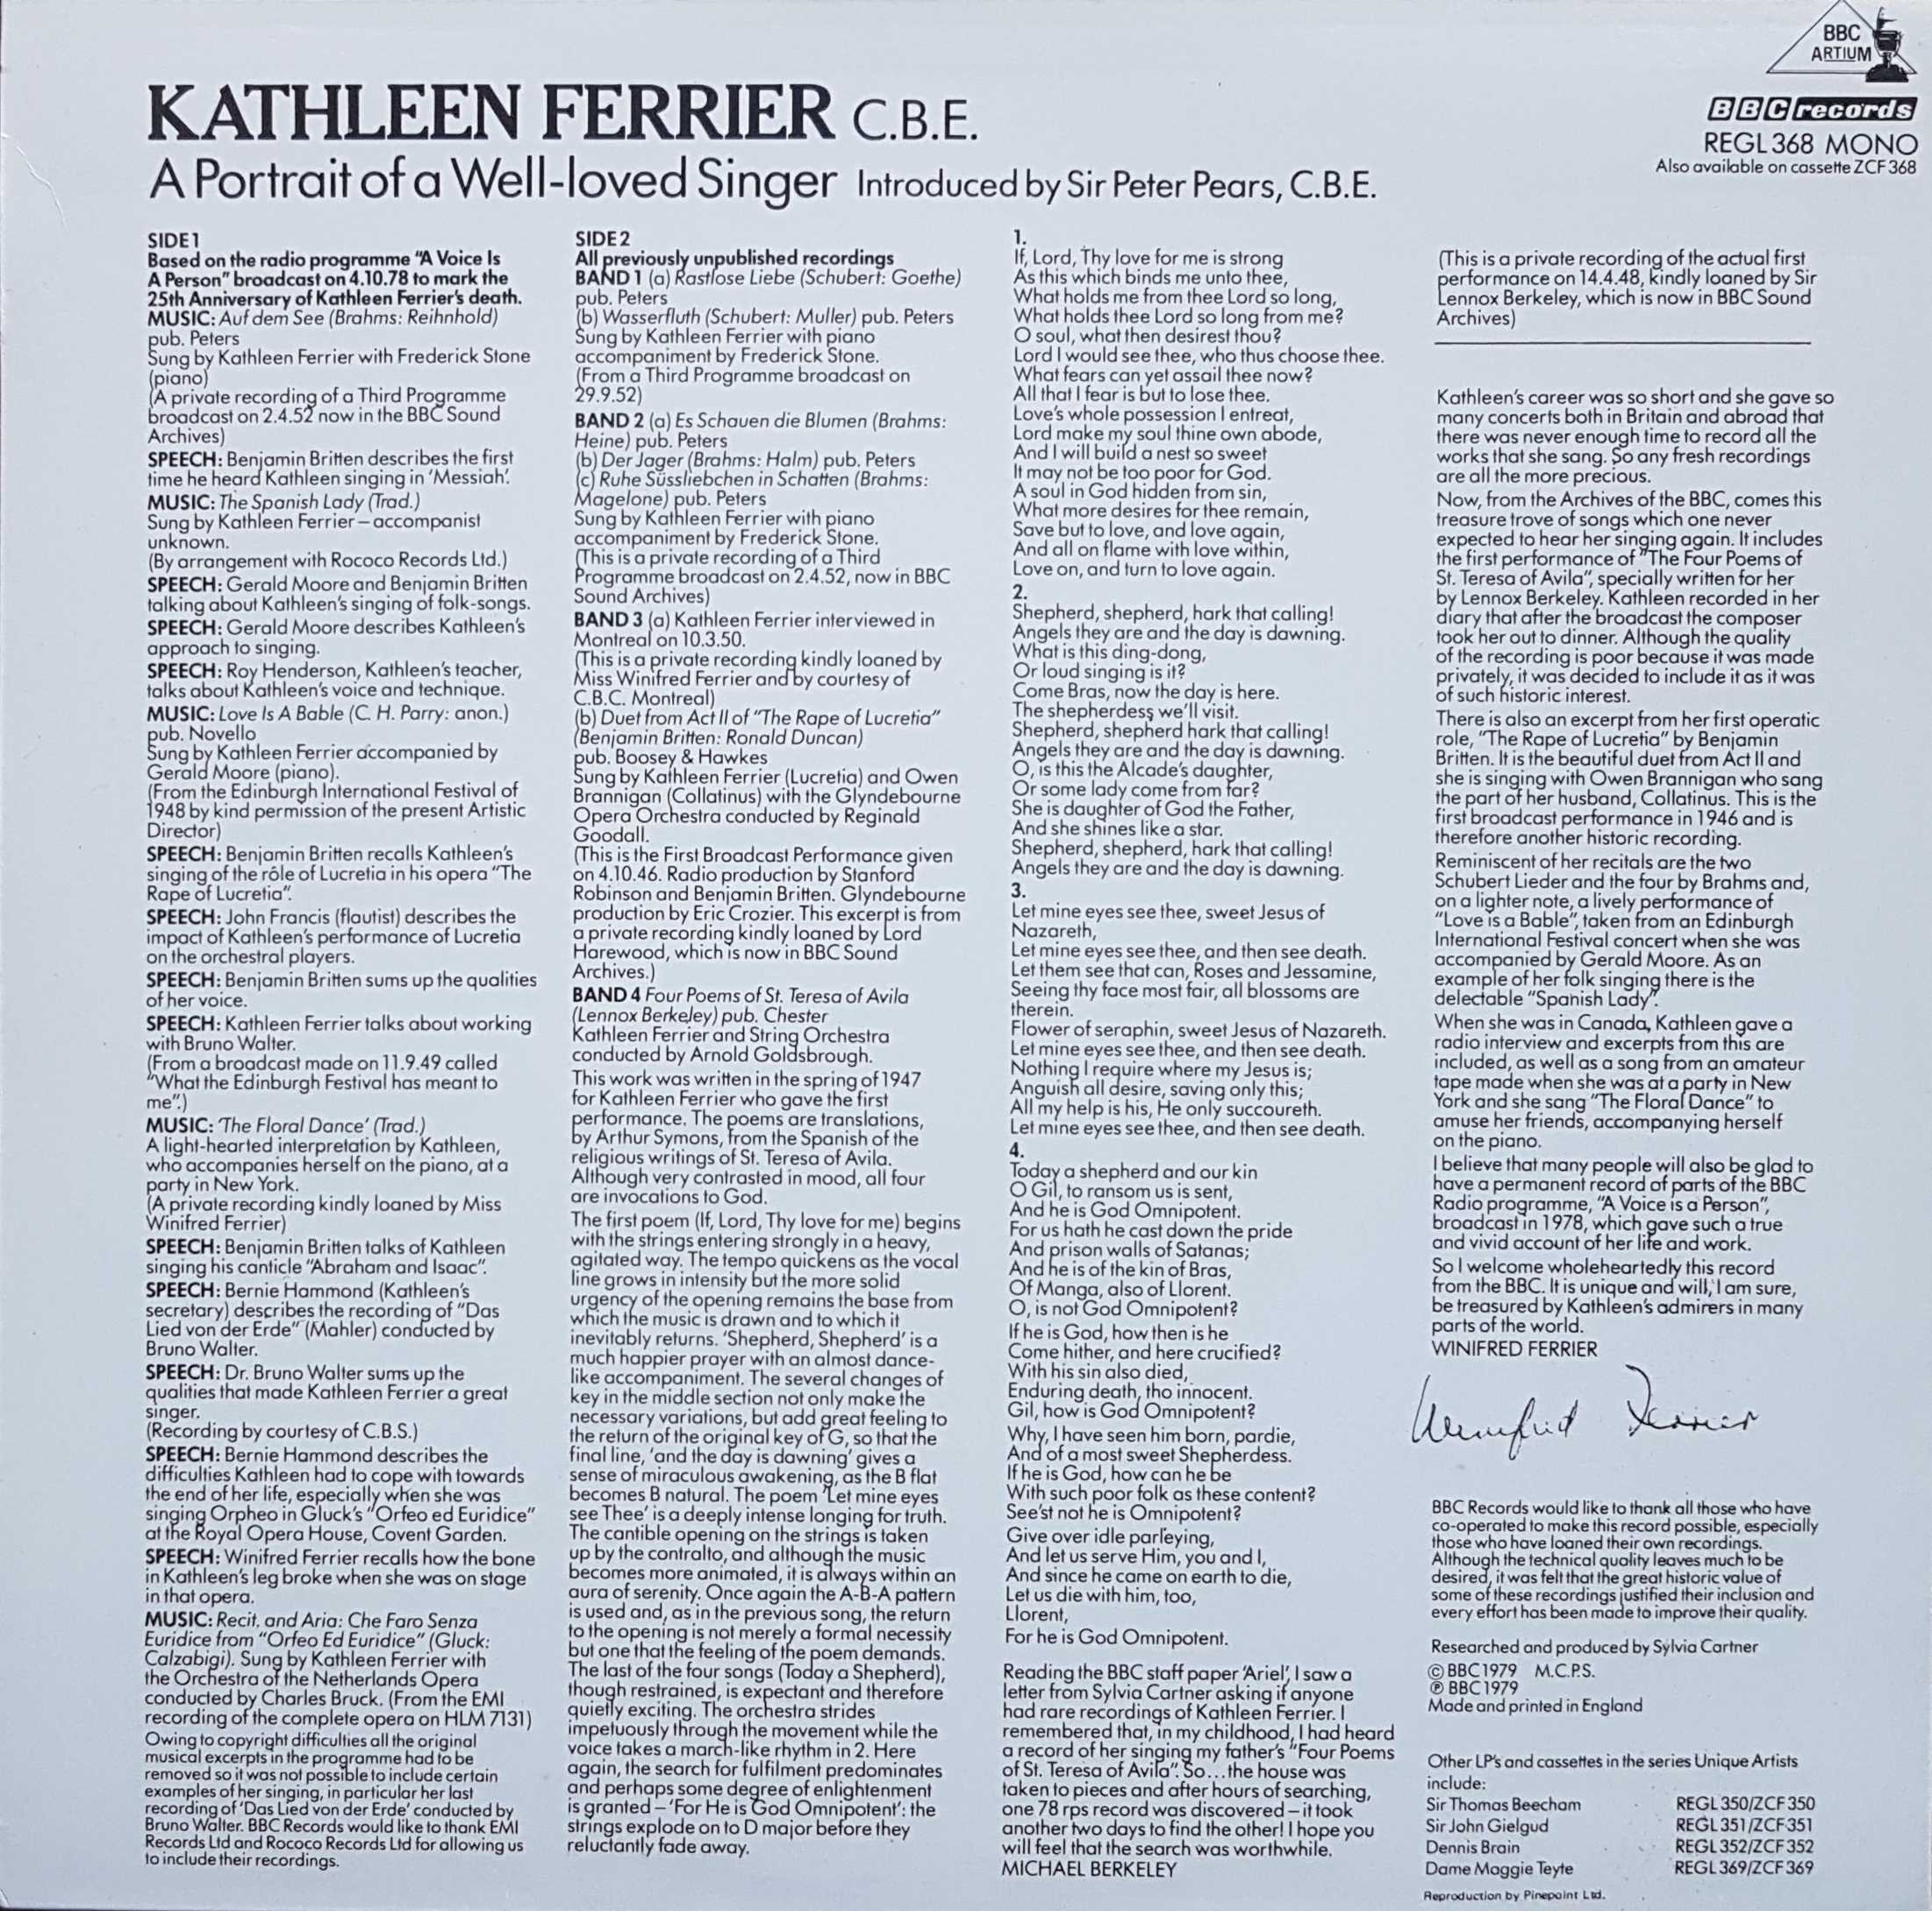 Picture of REGL 368 Kathleen Ferrier by artist Kathleen Ferrier from the BBC records and Tapes library